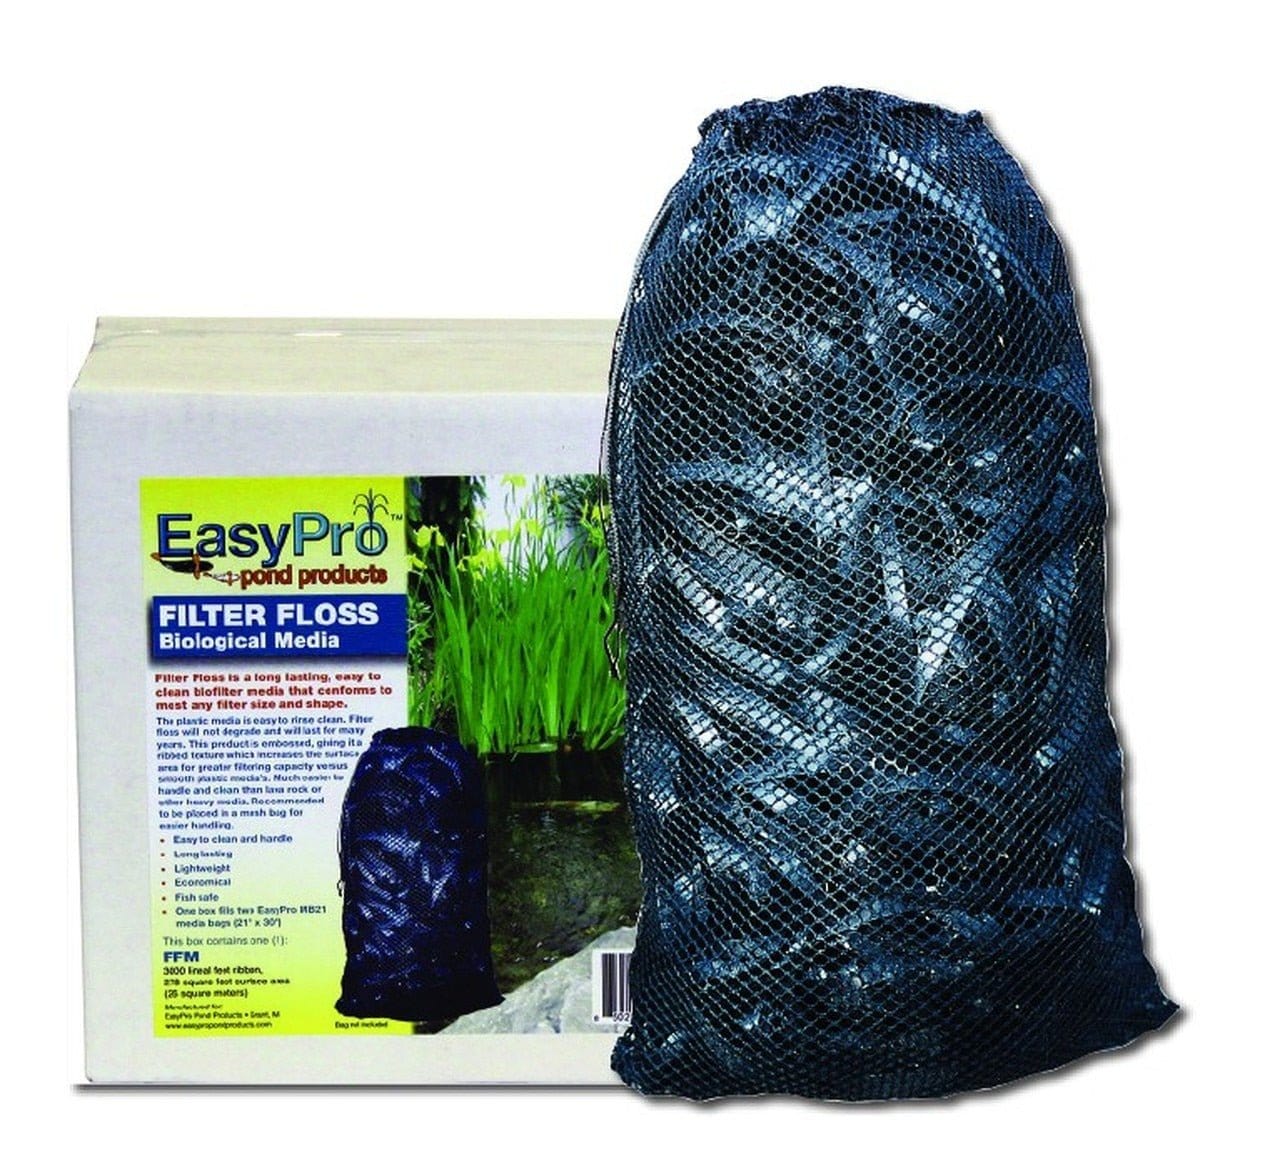 EasyPro Filter Replacement Pads MB21 Media Bag with 1/3 Roll Filter Floss Pond Filter Floss Bio-Media Pond Filter Floss Bio-Media - Smith Creek Fish Farm